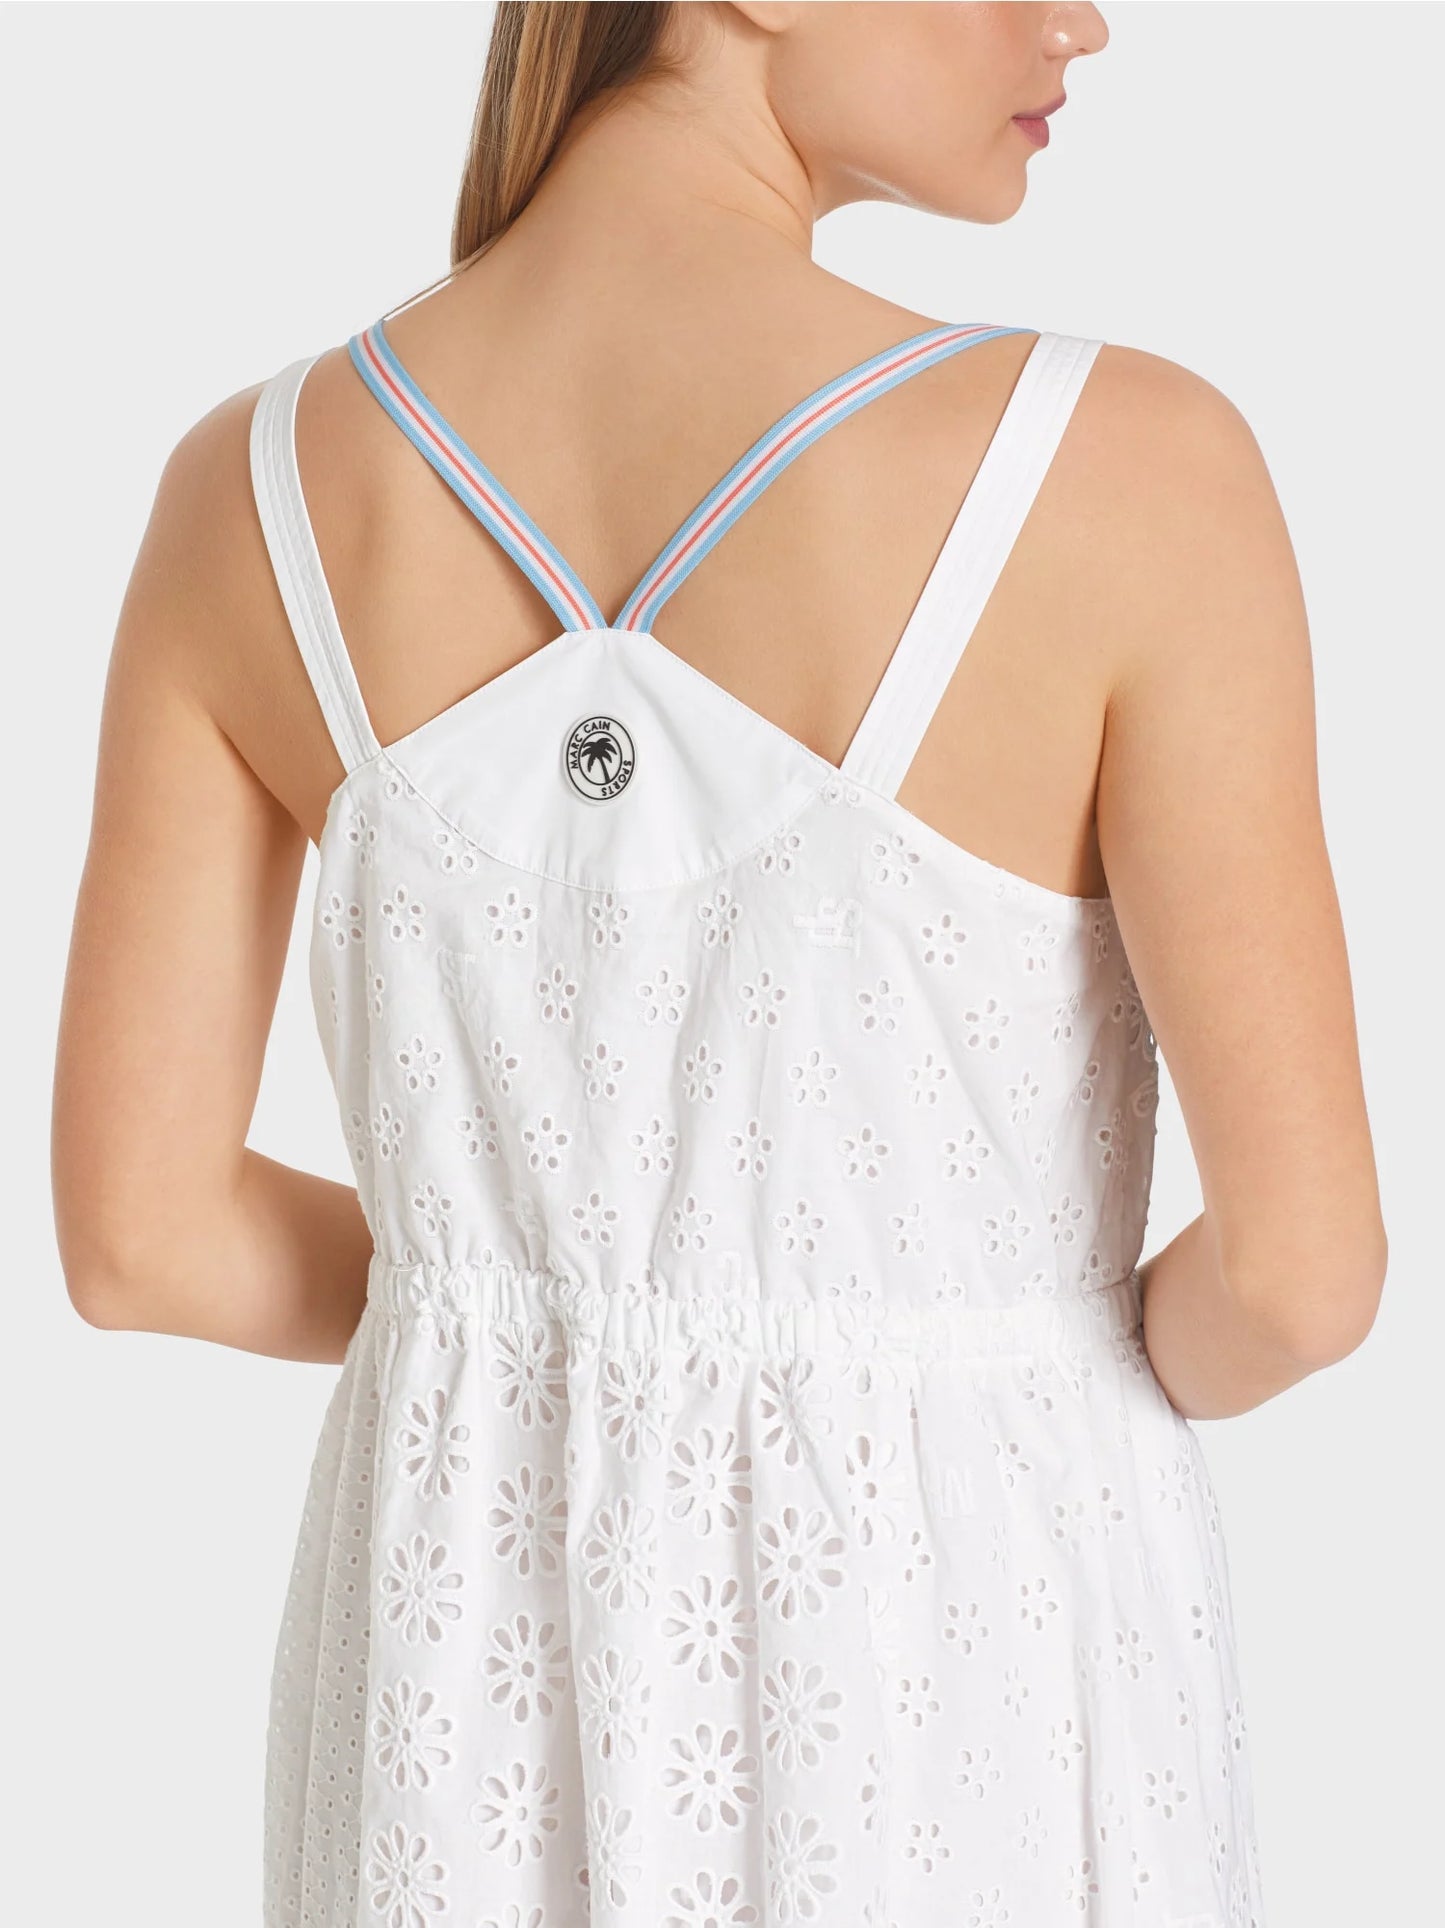 Summer dress with eyelet embroidery